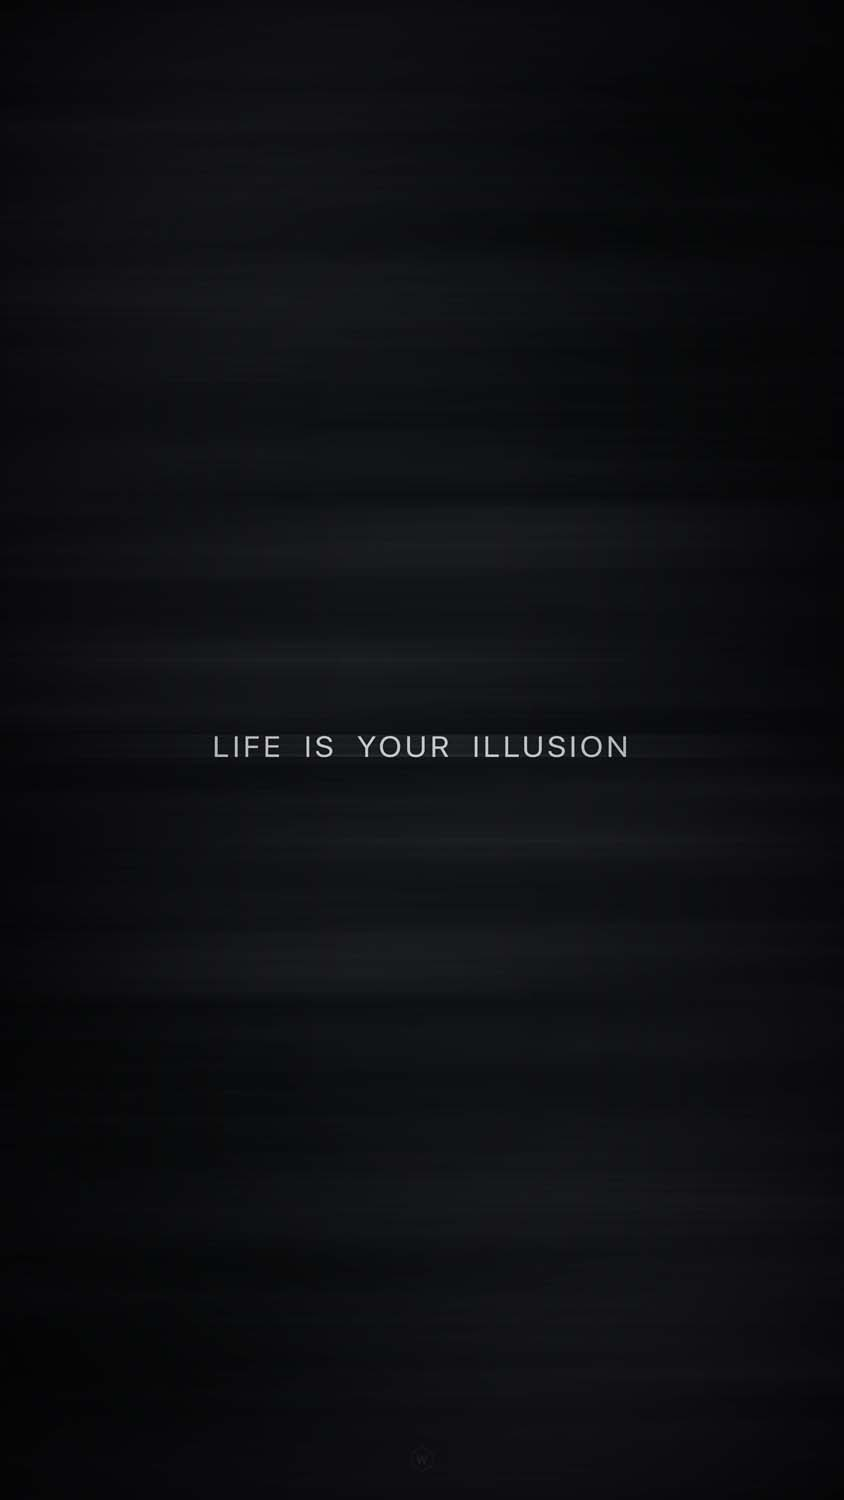 Life Is Illusion IPhone Wallpaper HD  IPhone Wallpapers